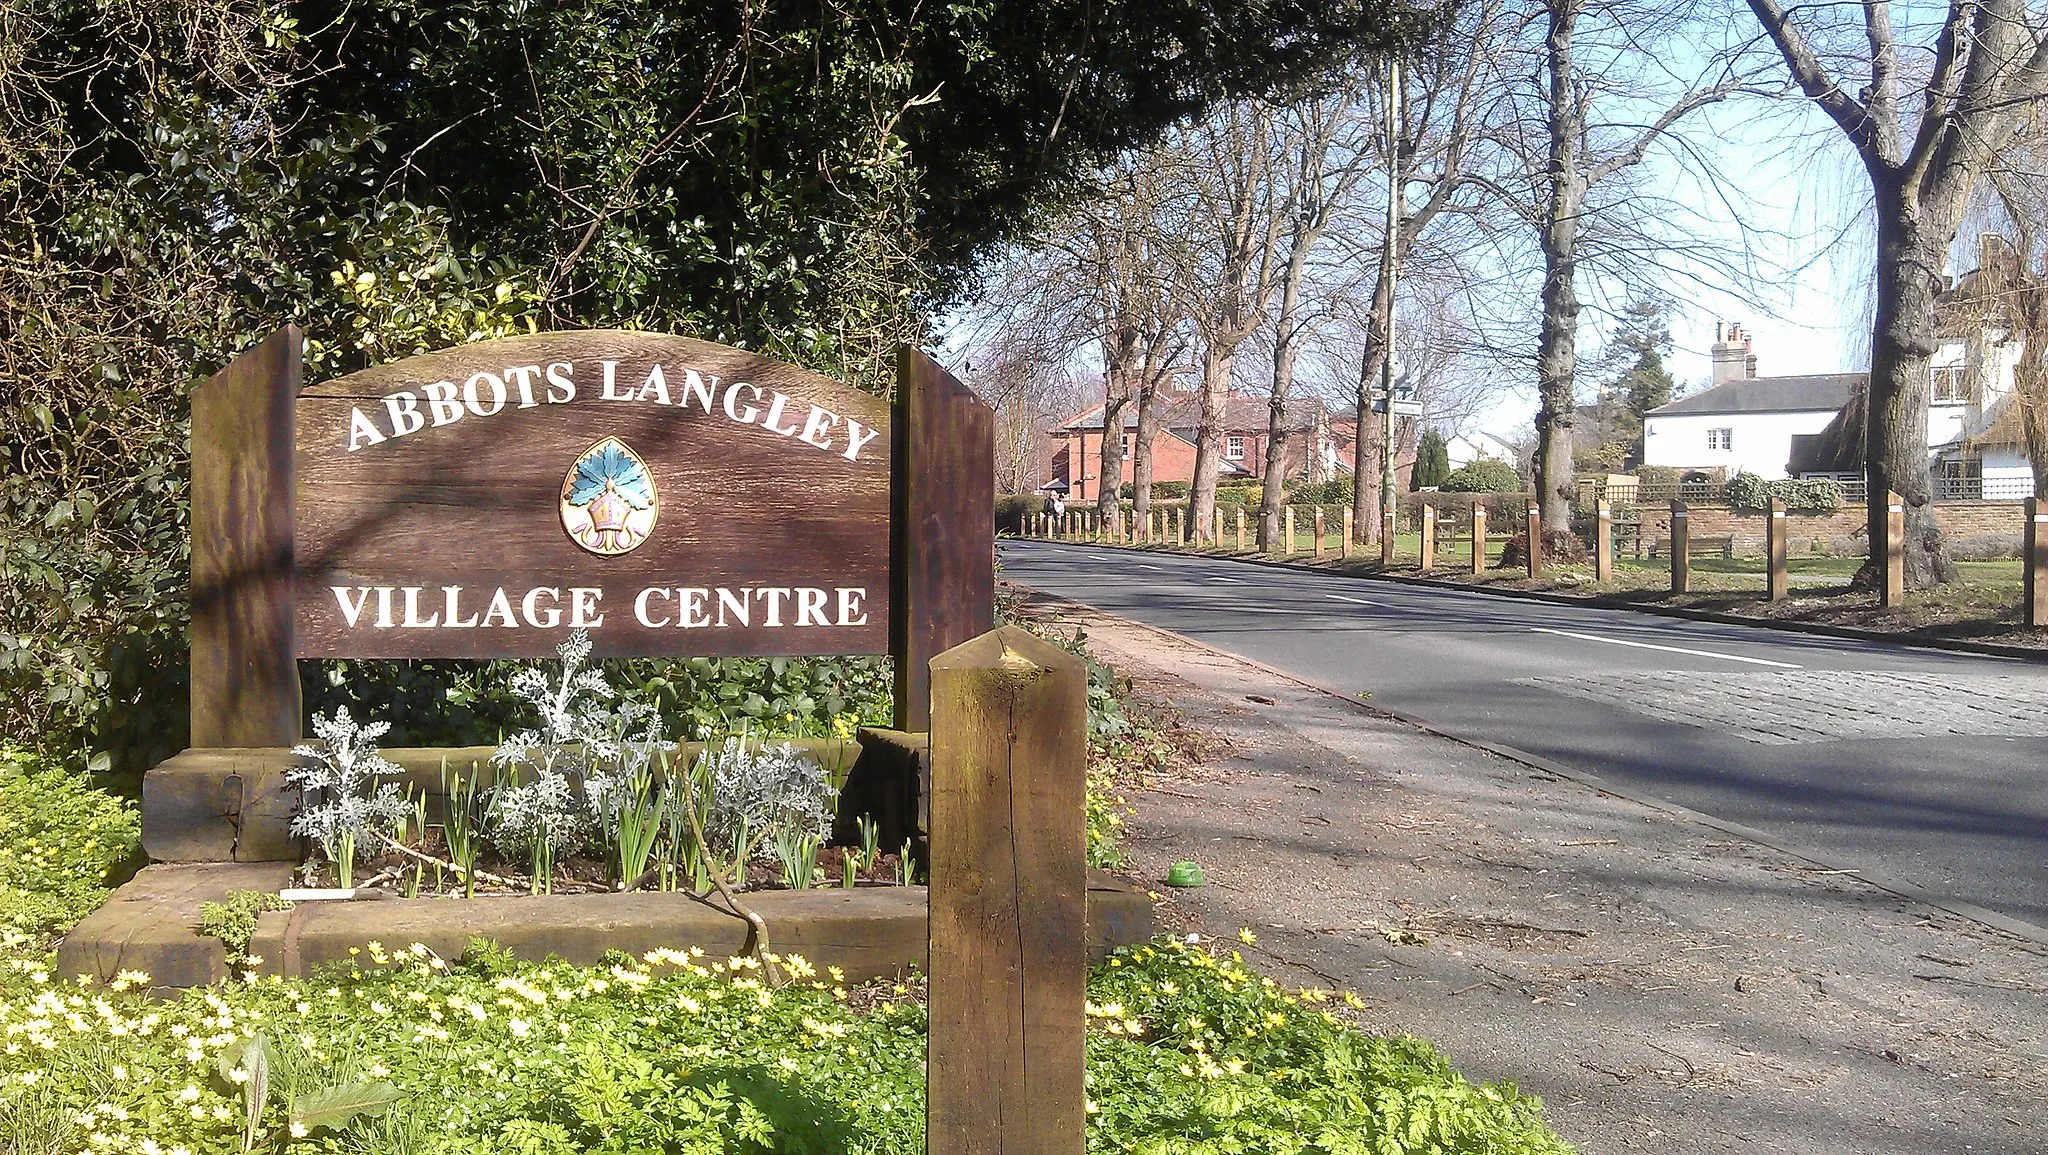 Image of Abbots Langley